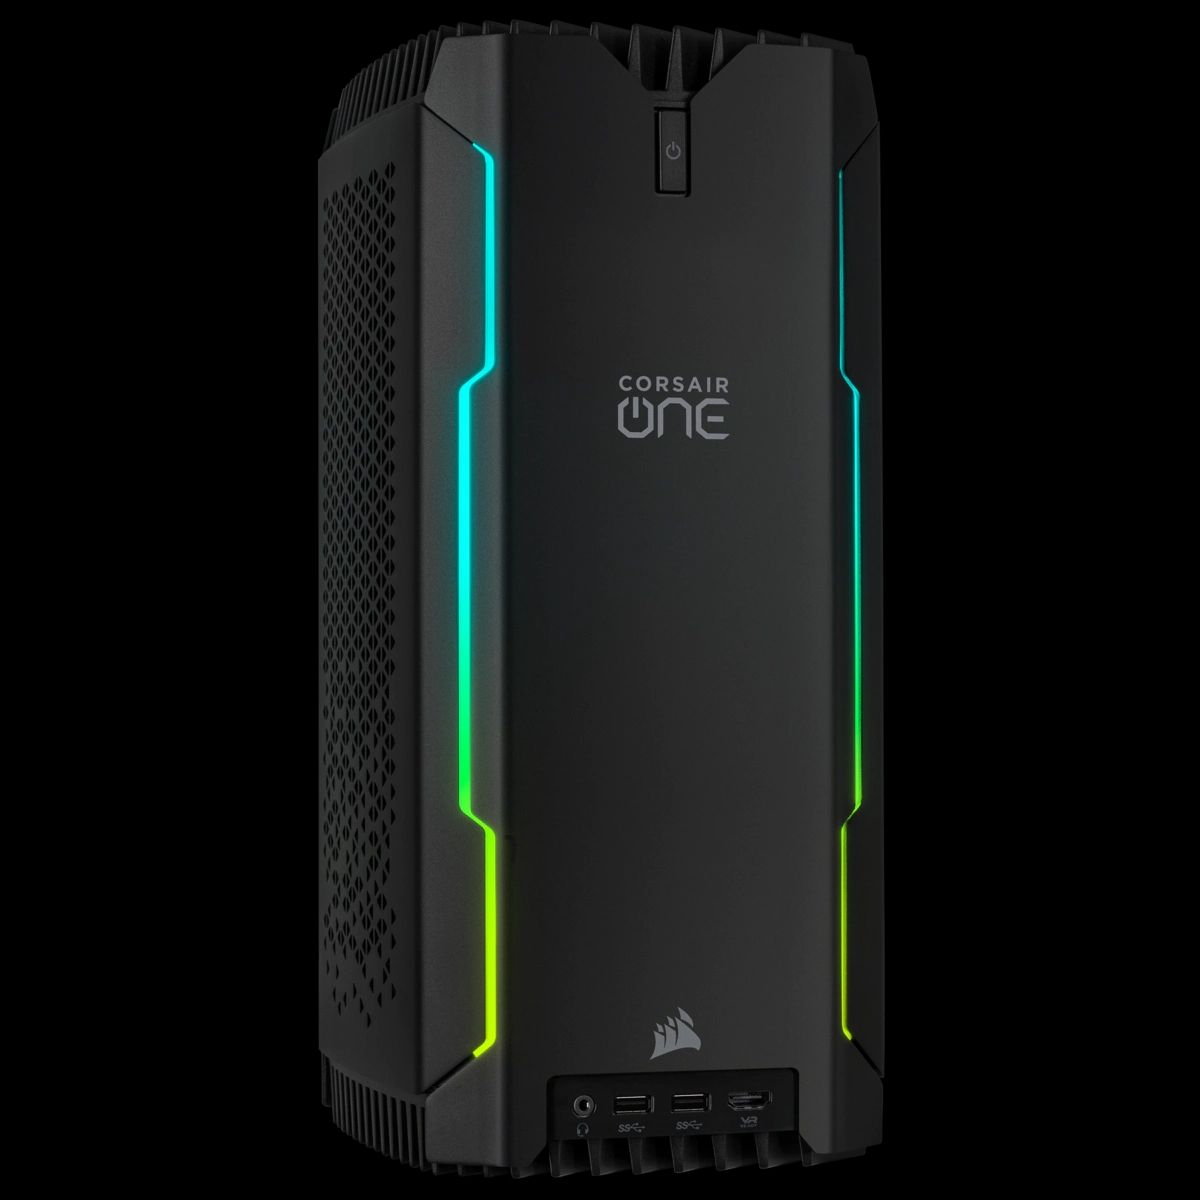 Corsair ONE i164 front